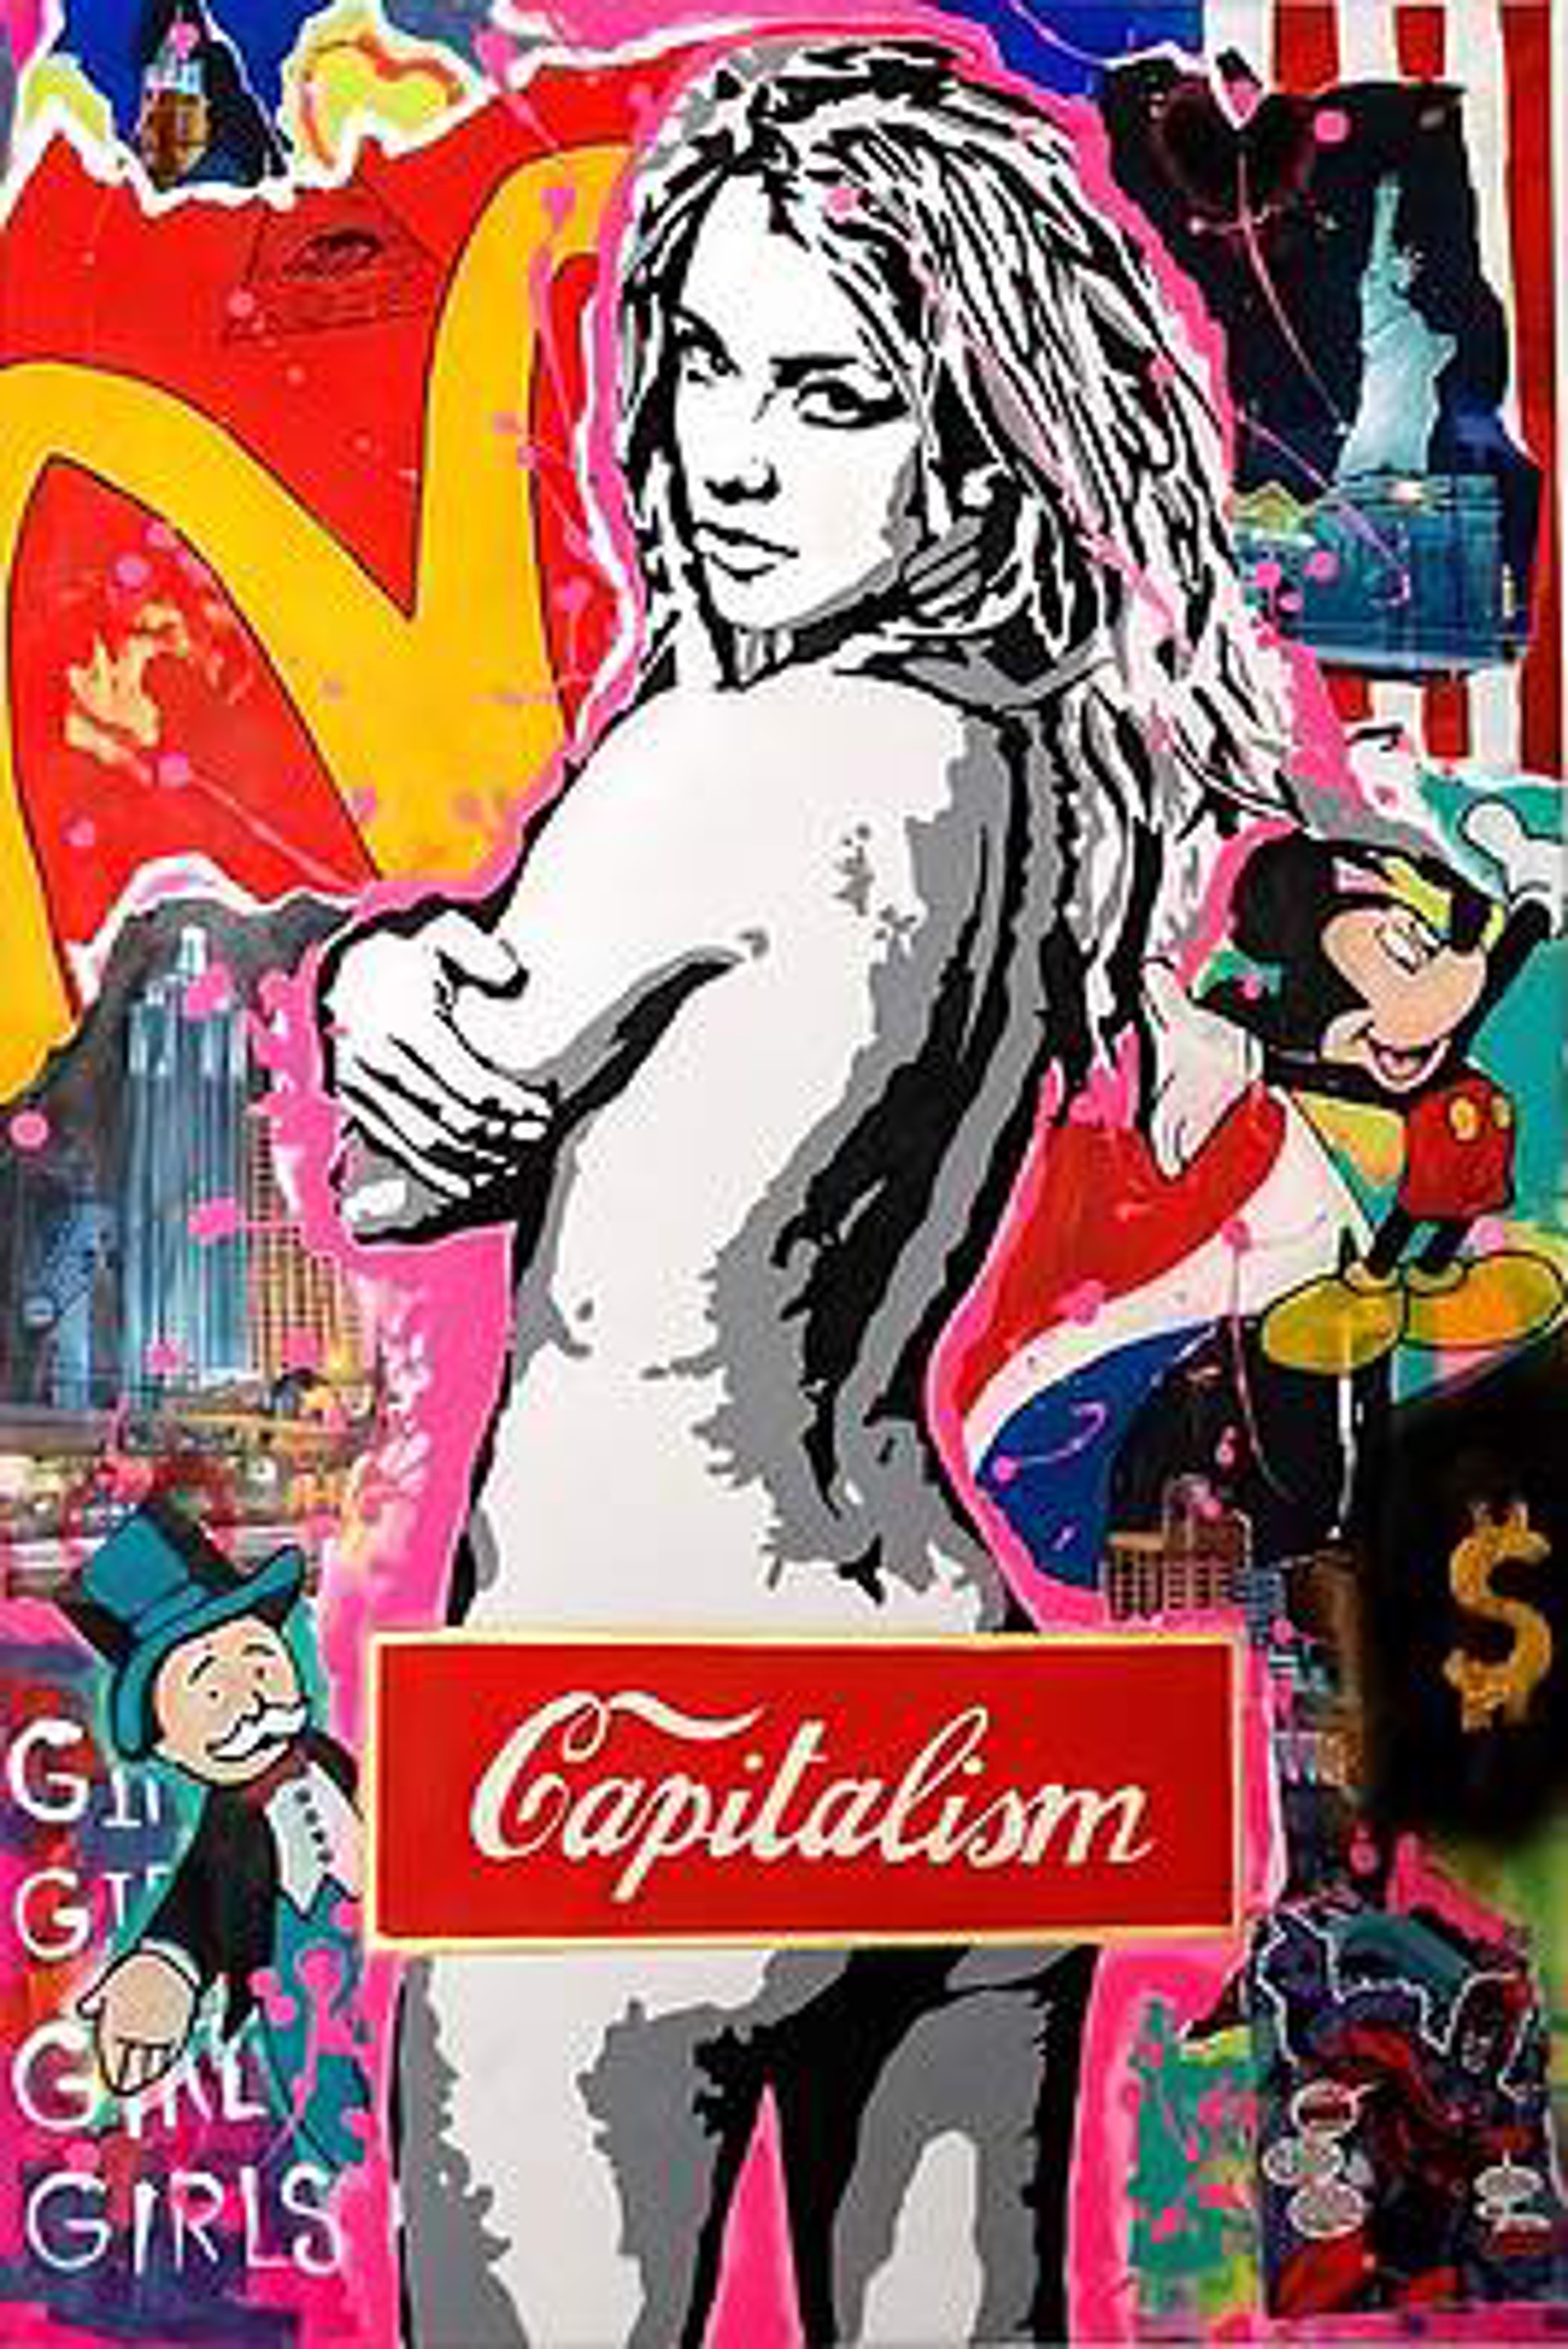 Capitalism by Jack Andriano